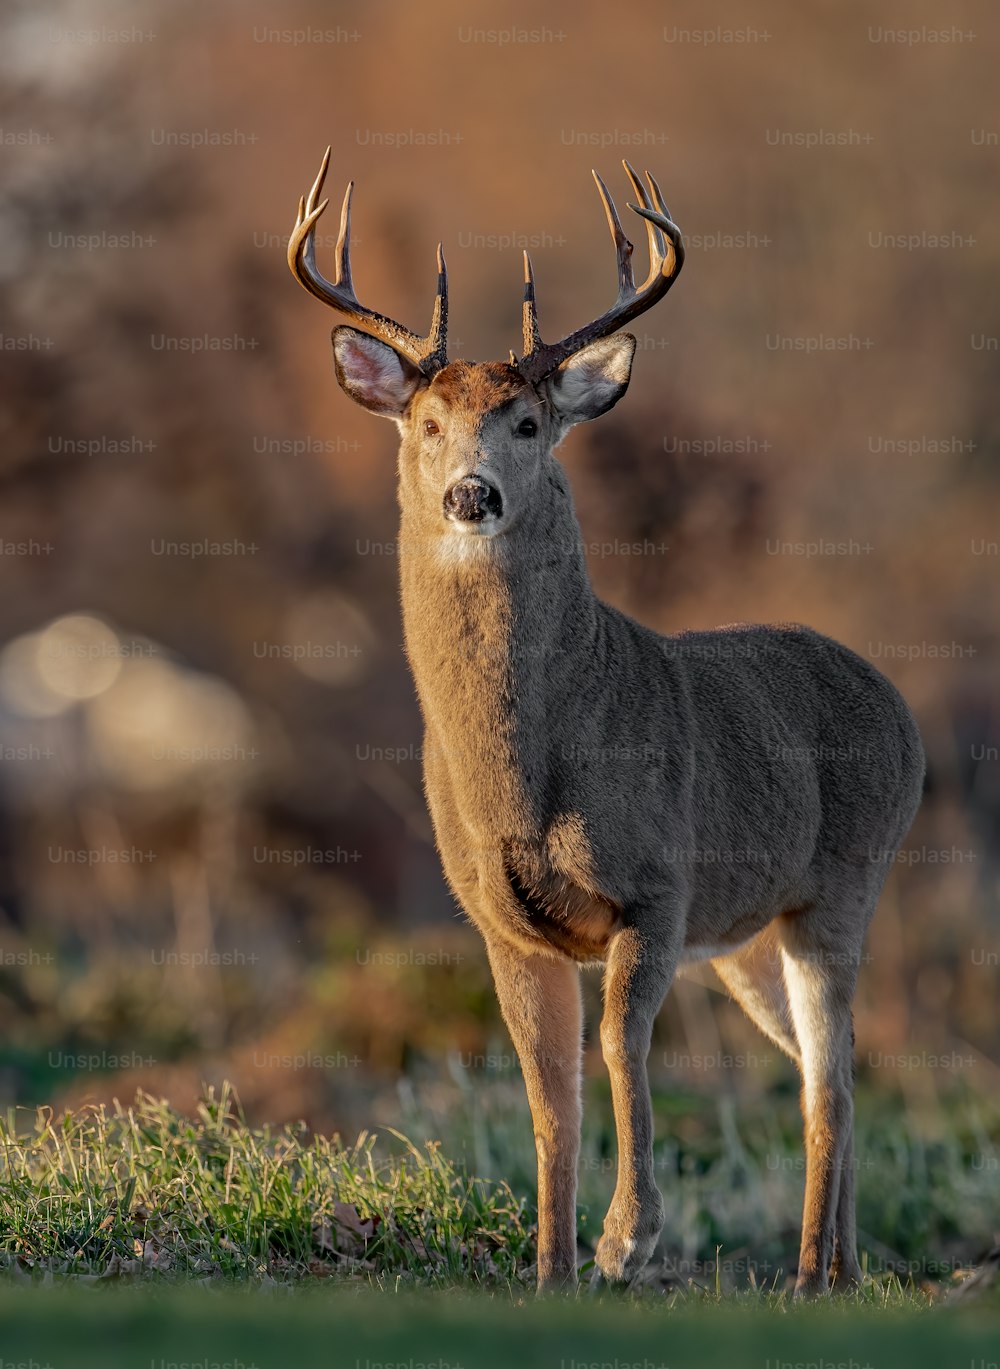 A White-tailed Deer in Pennsylvania